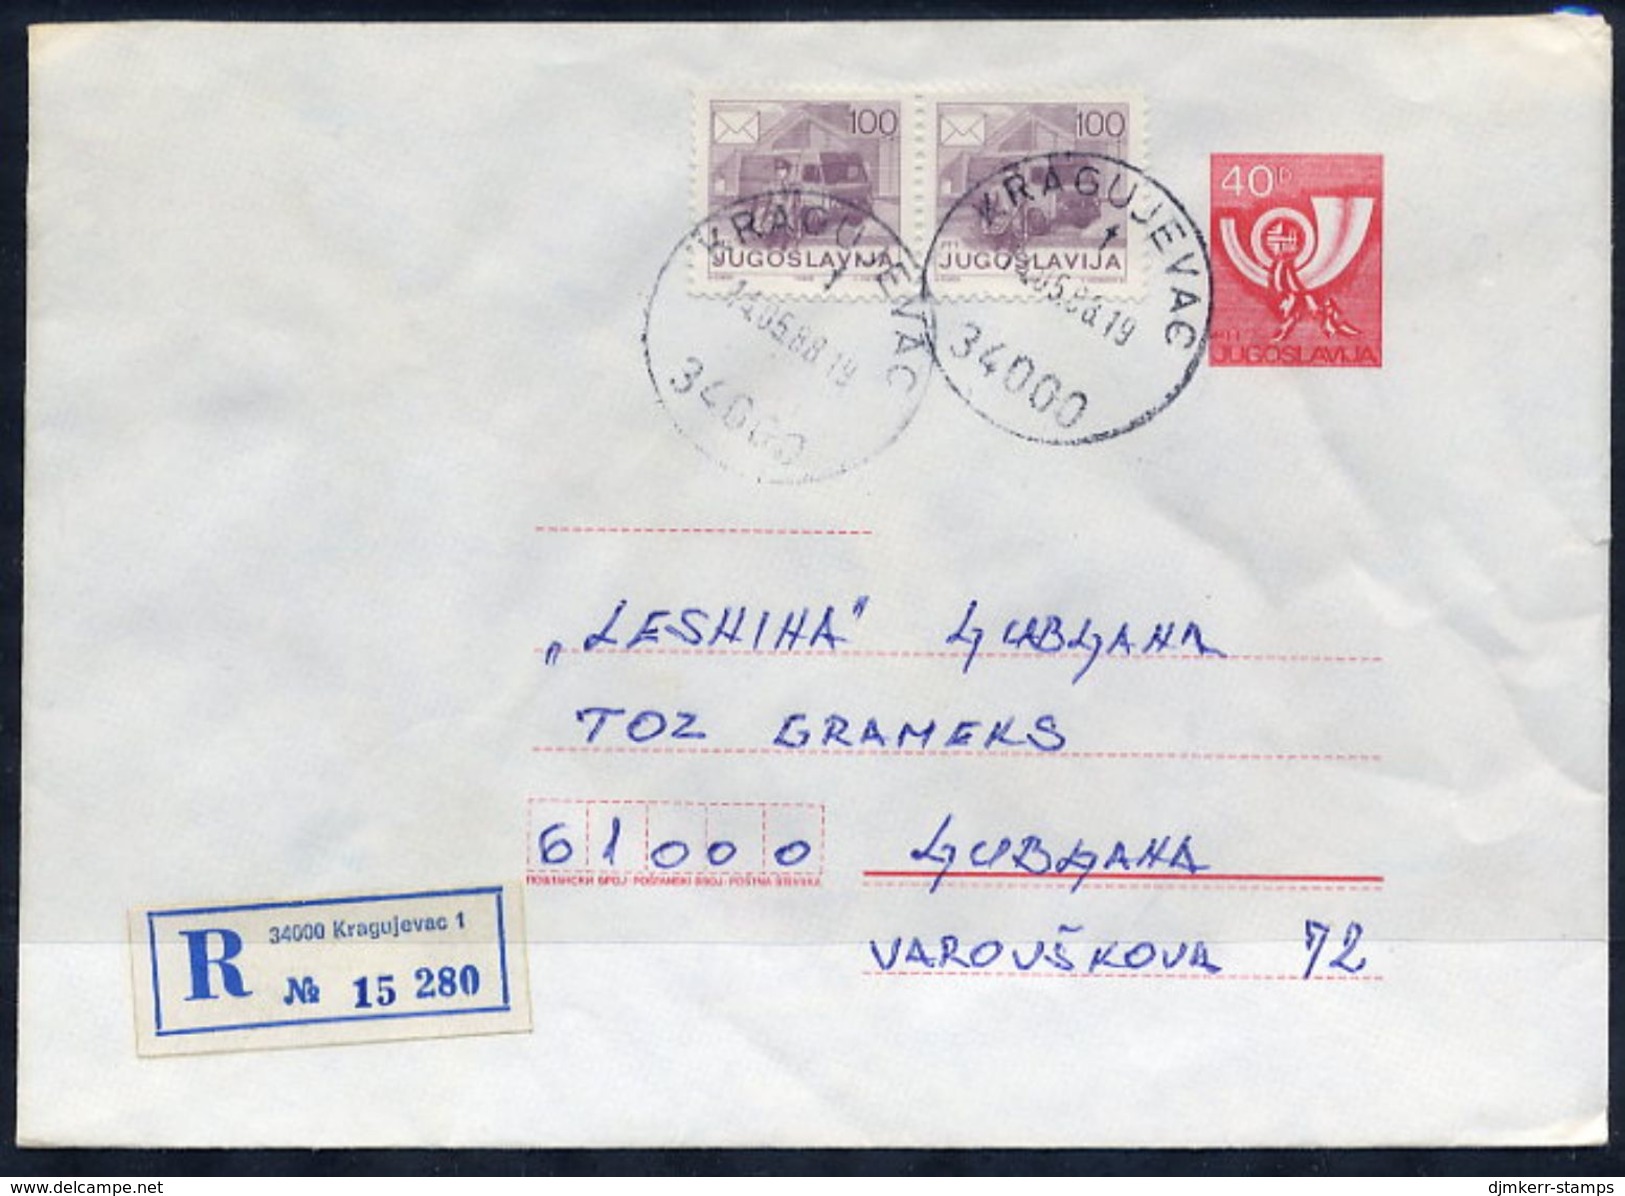 YUGOSLAVIA 1986 Posthorn 40 D.stationery Envelope Format B With  Used With Additional Franking.  Michel U76B - Ganzsachen